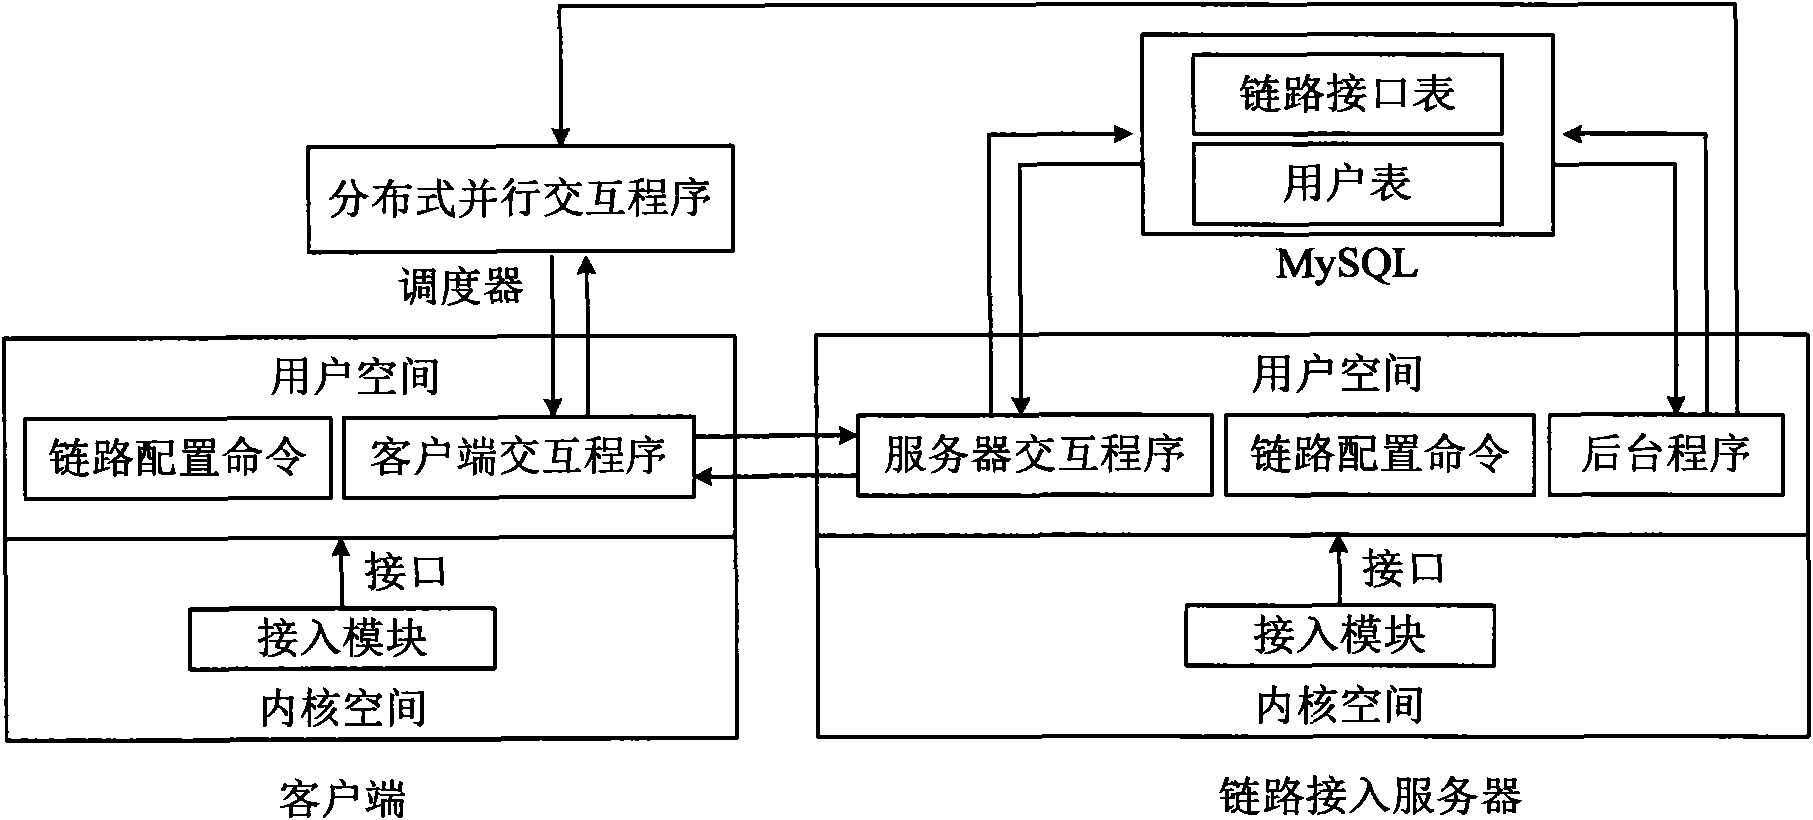 Multilink accessing and flow load dispatching managing method